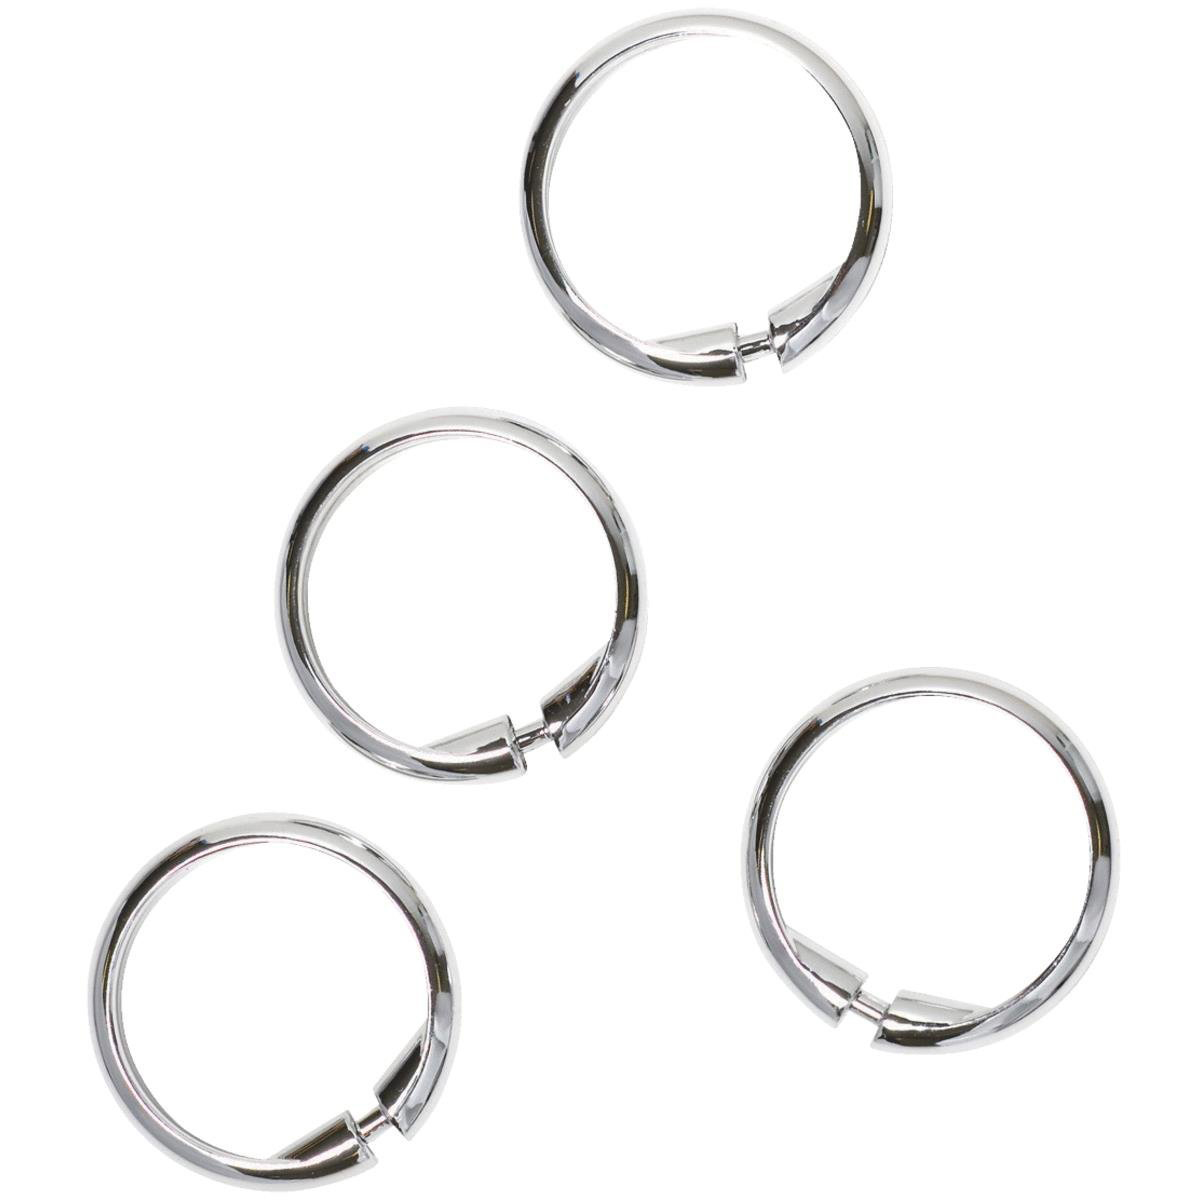 Tinted Plastic Shower Curtain Rings